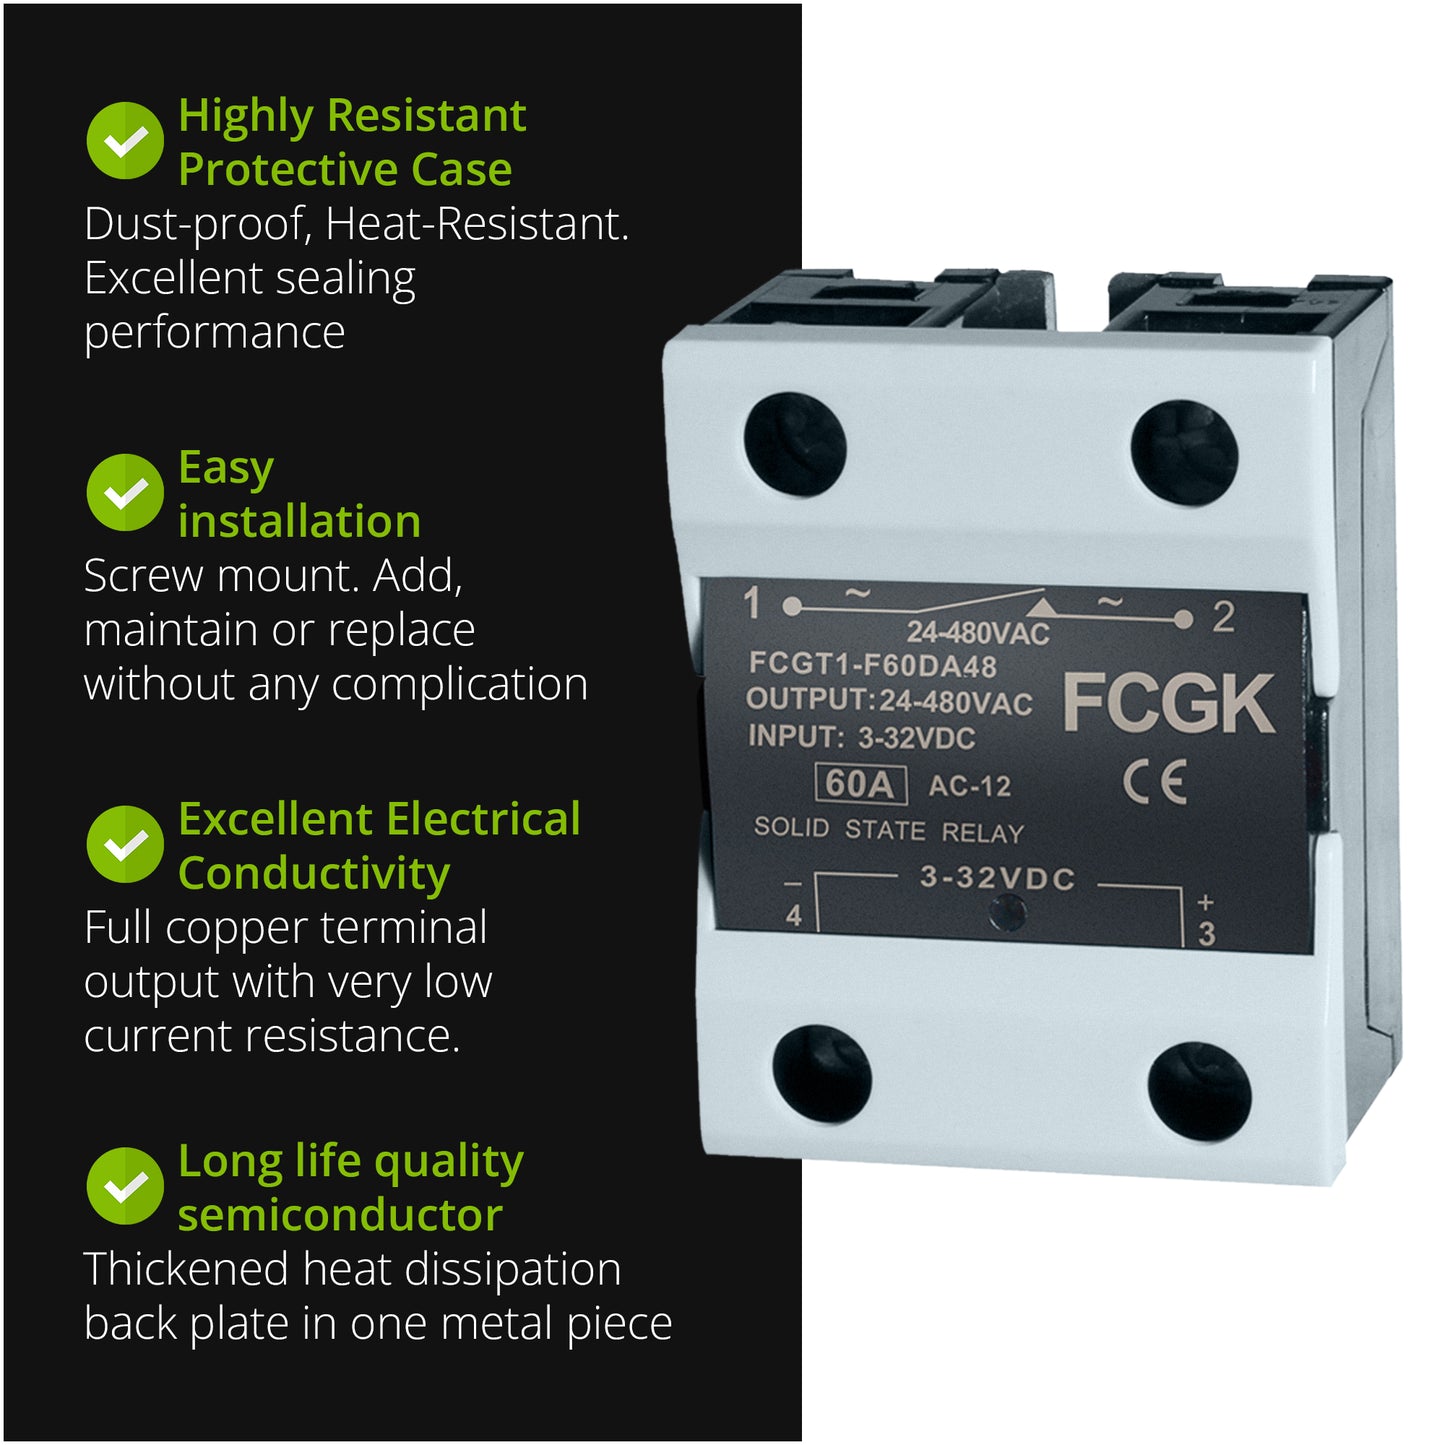 FCGK Solid State Relay SSR-60DA DC to AC Input 3-32VDC to Output 24-480VAC 60A Single Phase Plastic Cover